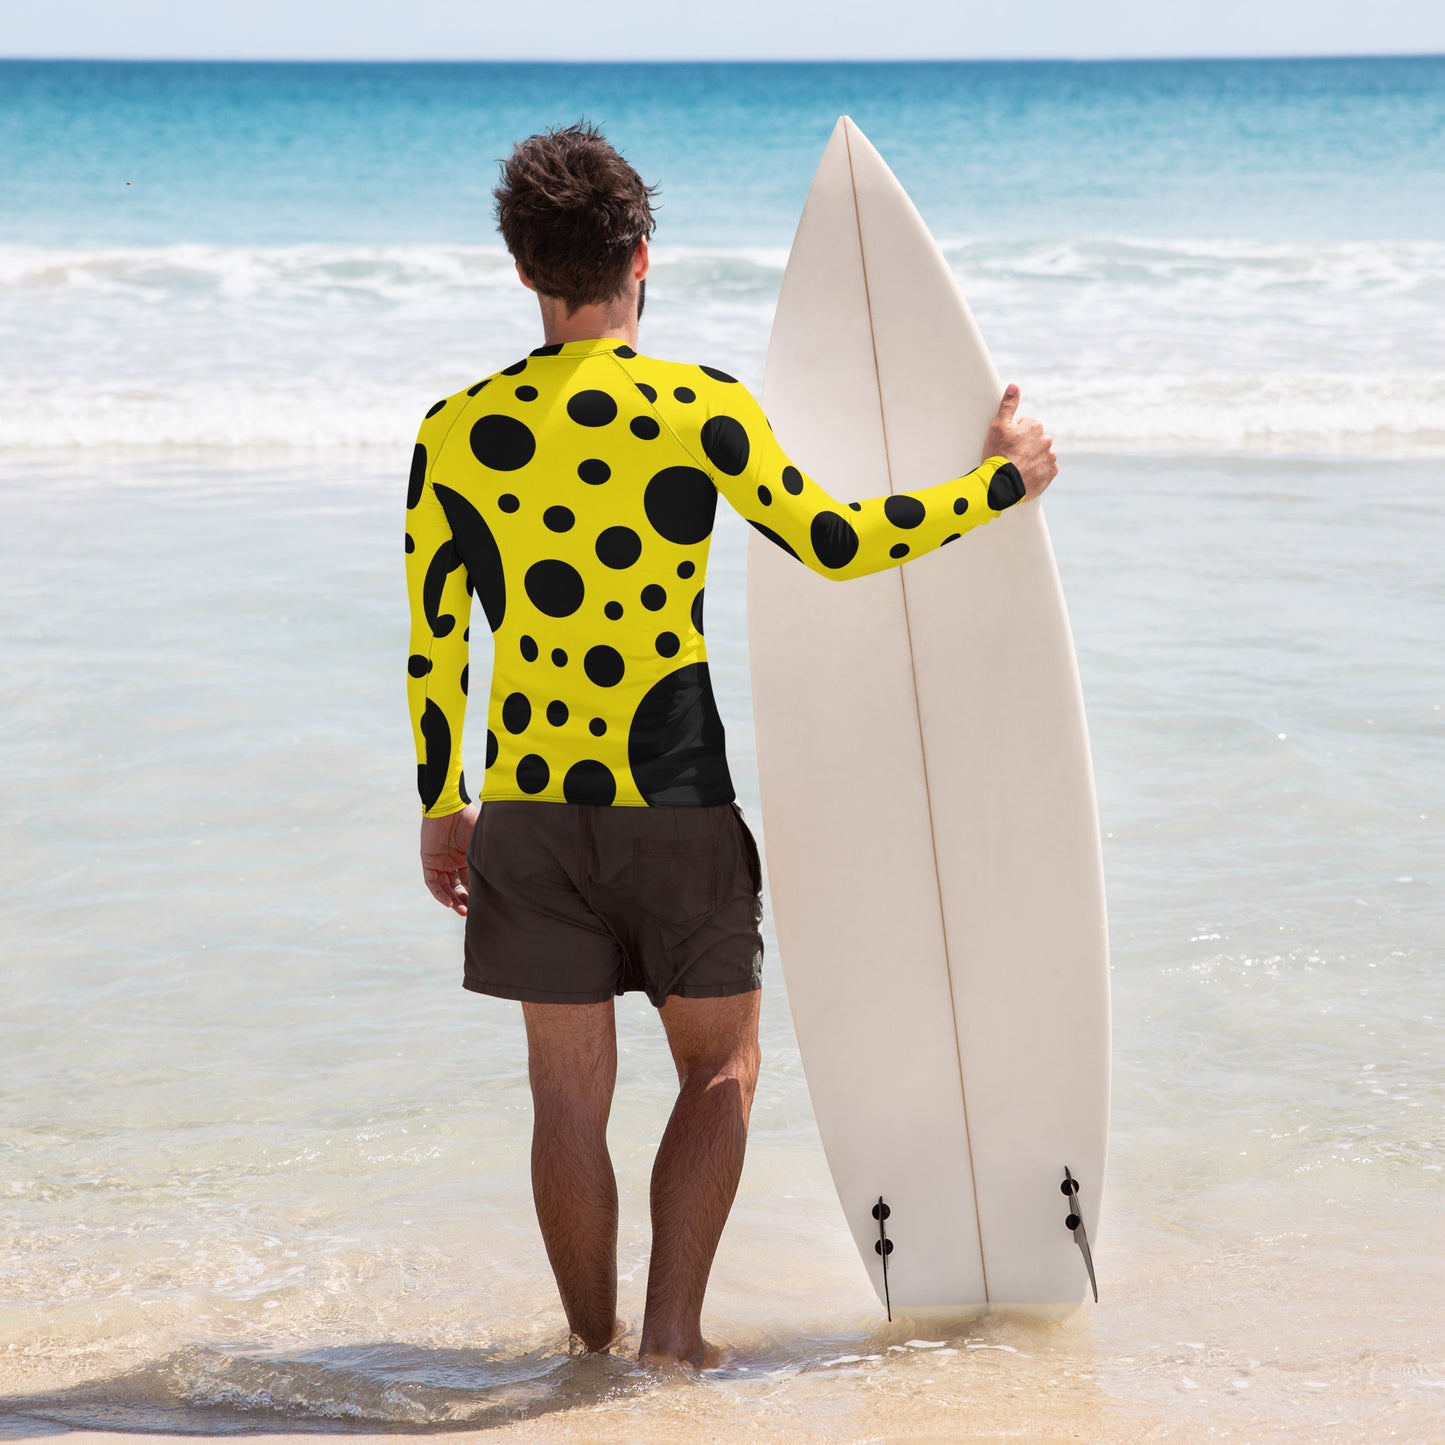 Surf in Style: Men's High-Performance Rash Guard - Dotted Sunshine